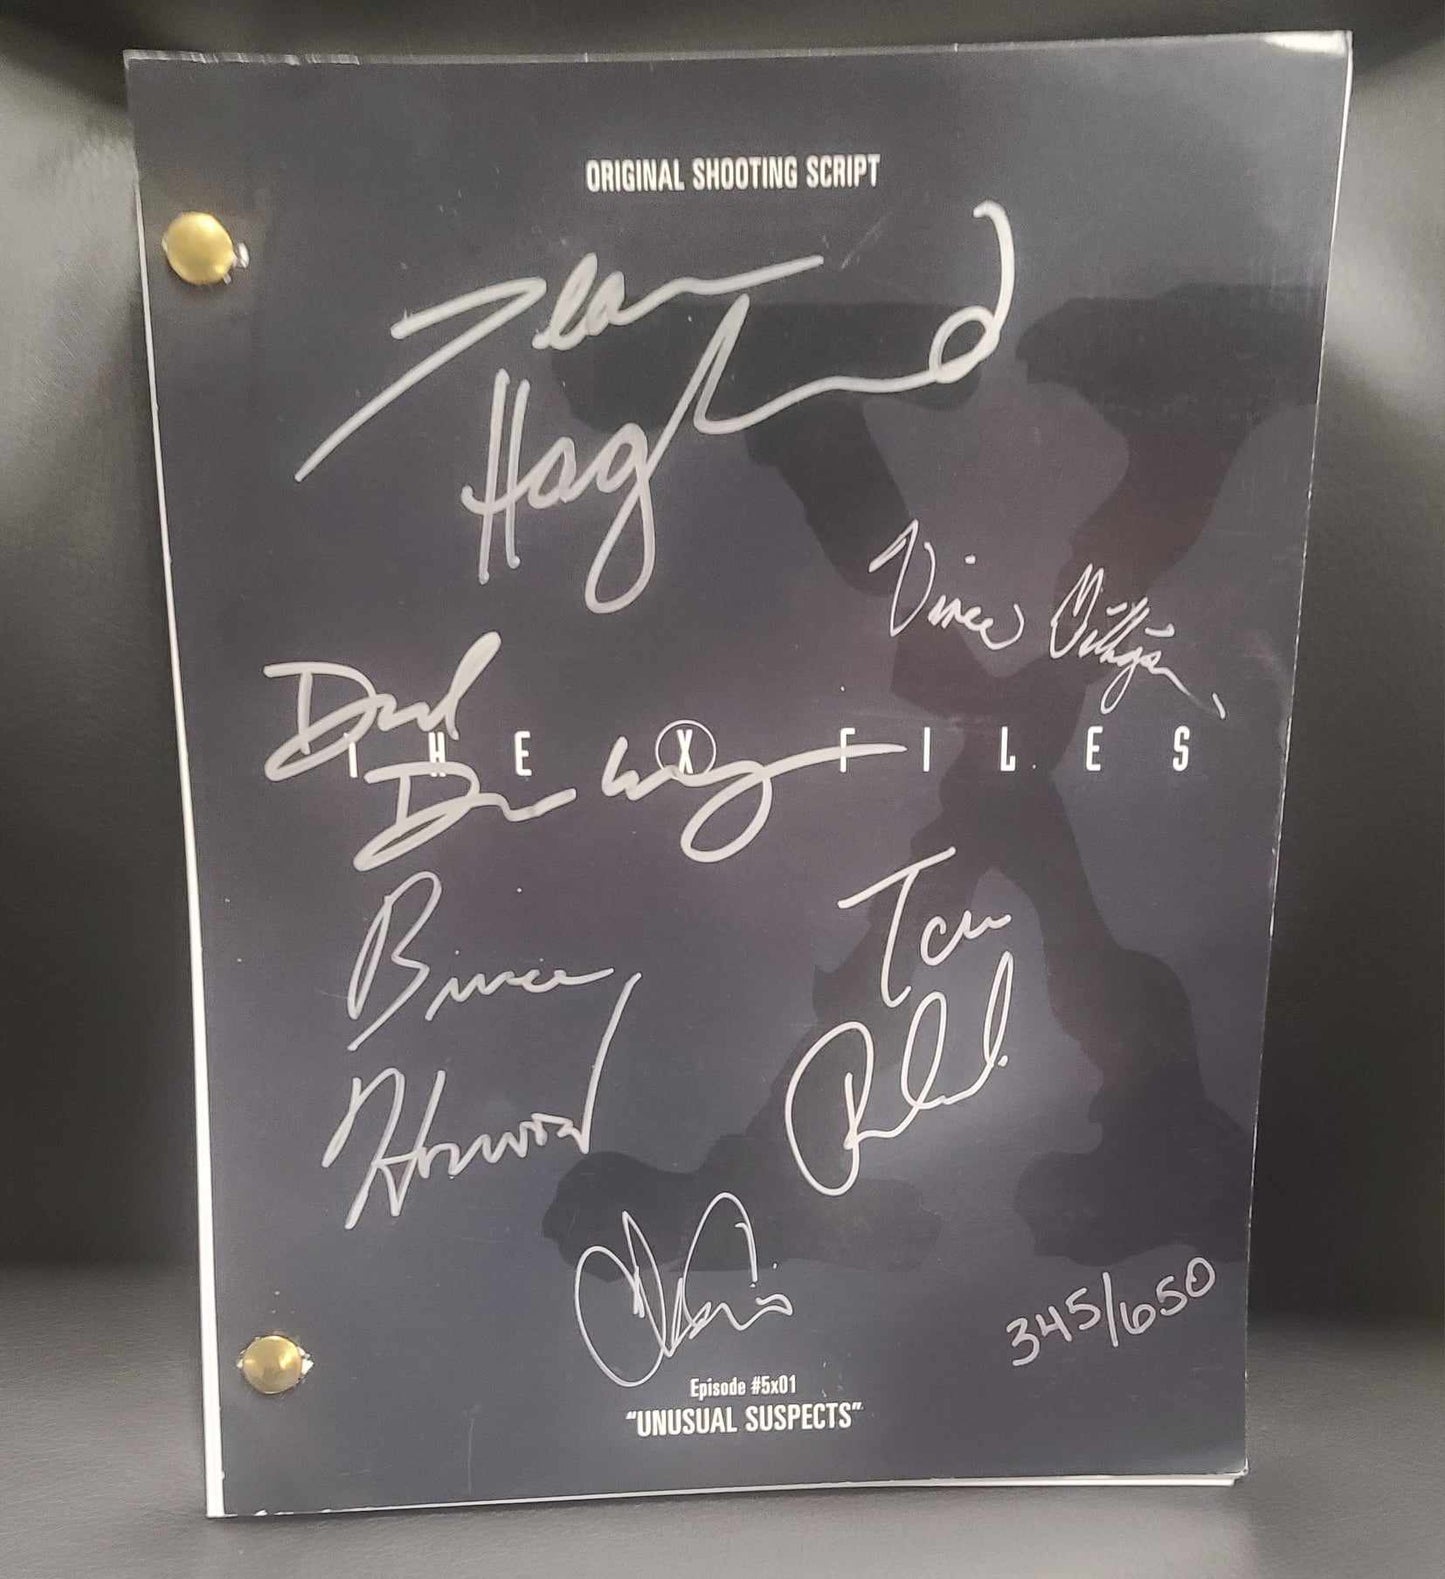 XFiles Script -Episode UNUSUAL SUSPECTS- Autographed by VINCE GILLIGAN, David Duchovny, Chris Carter, and more.